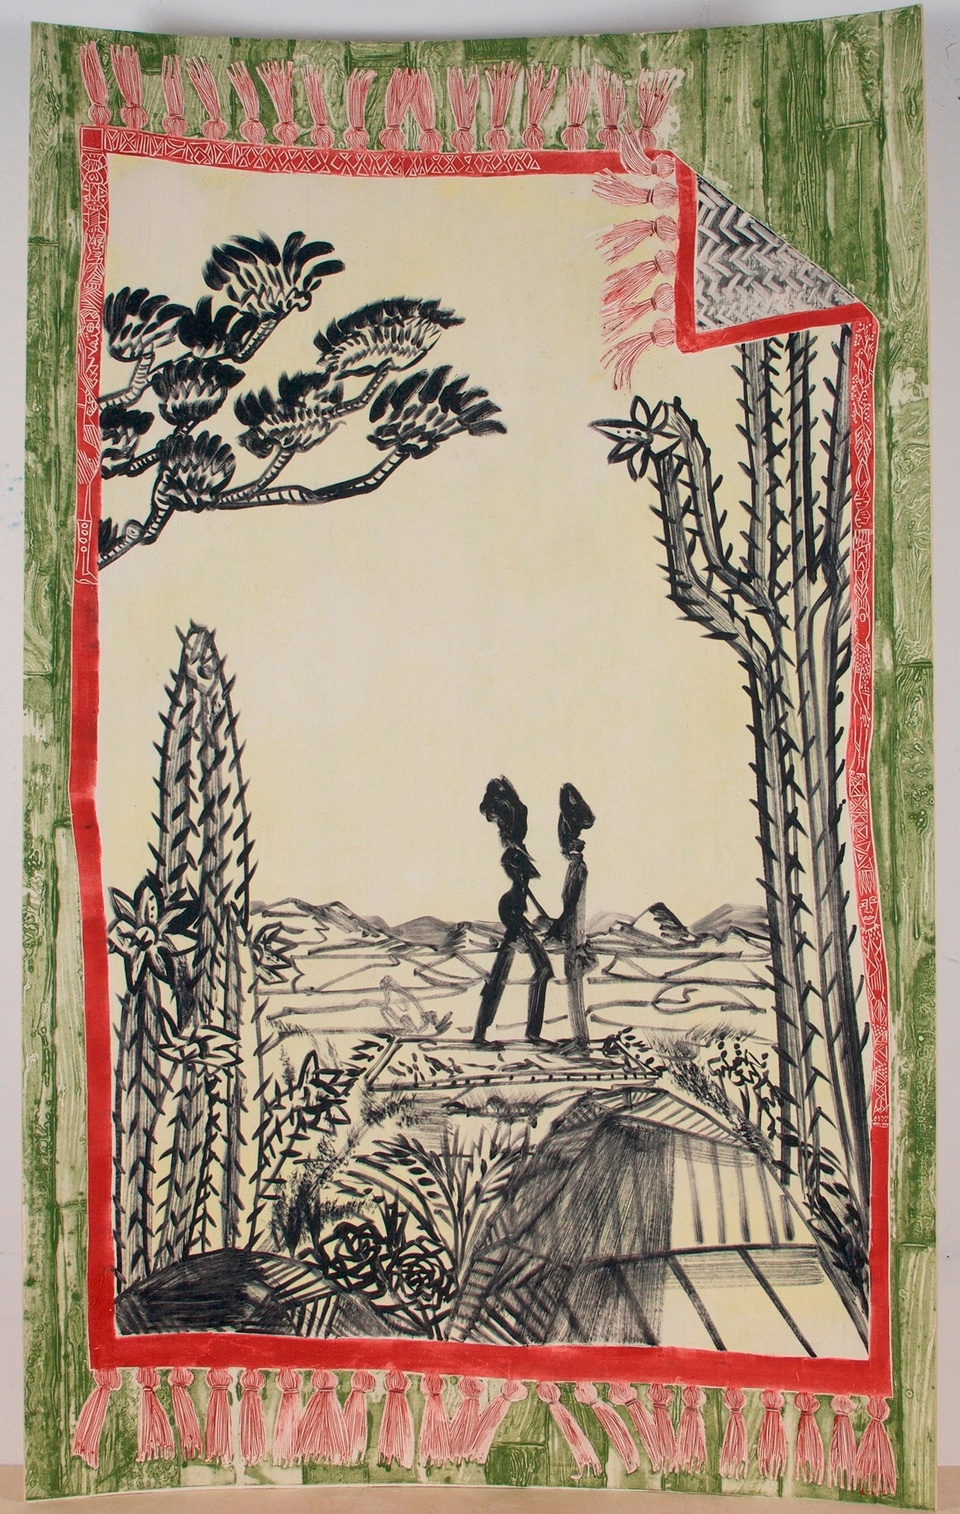 Black and white monotype of two figures flanked by cacti with a green, red, and pink border